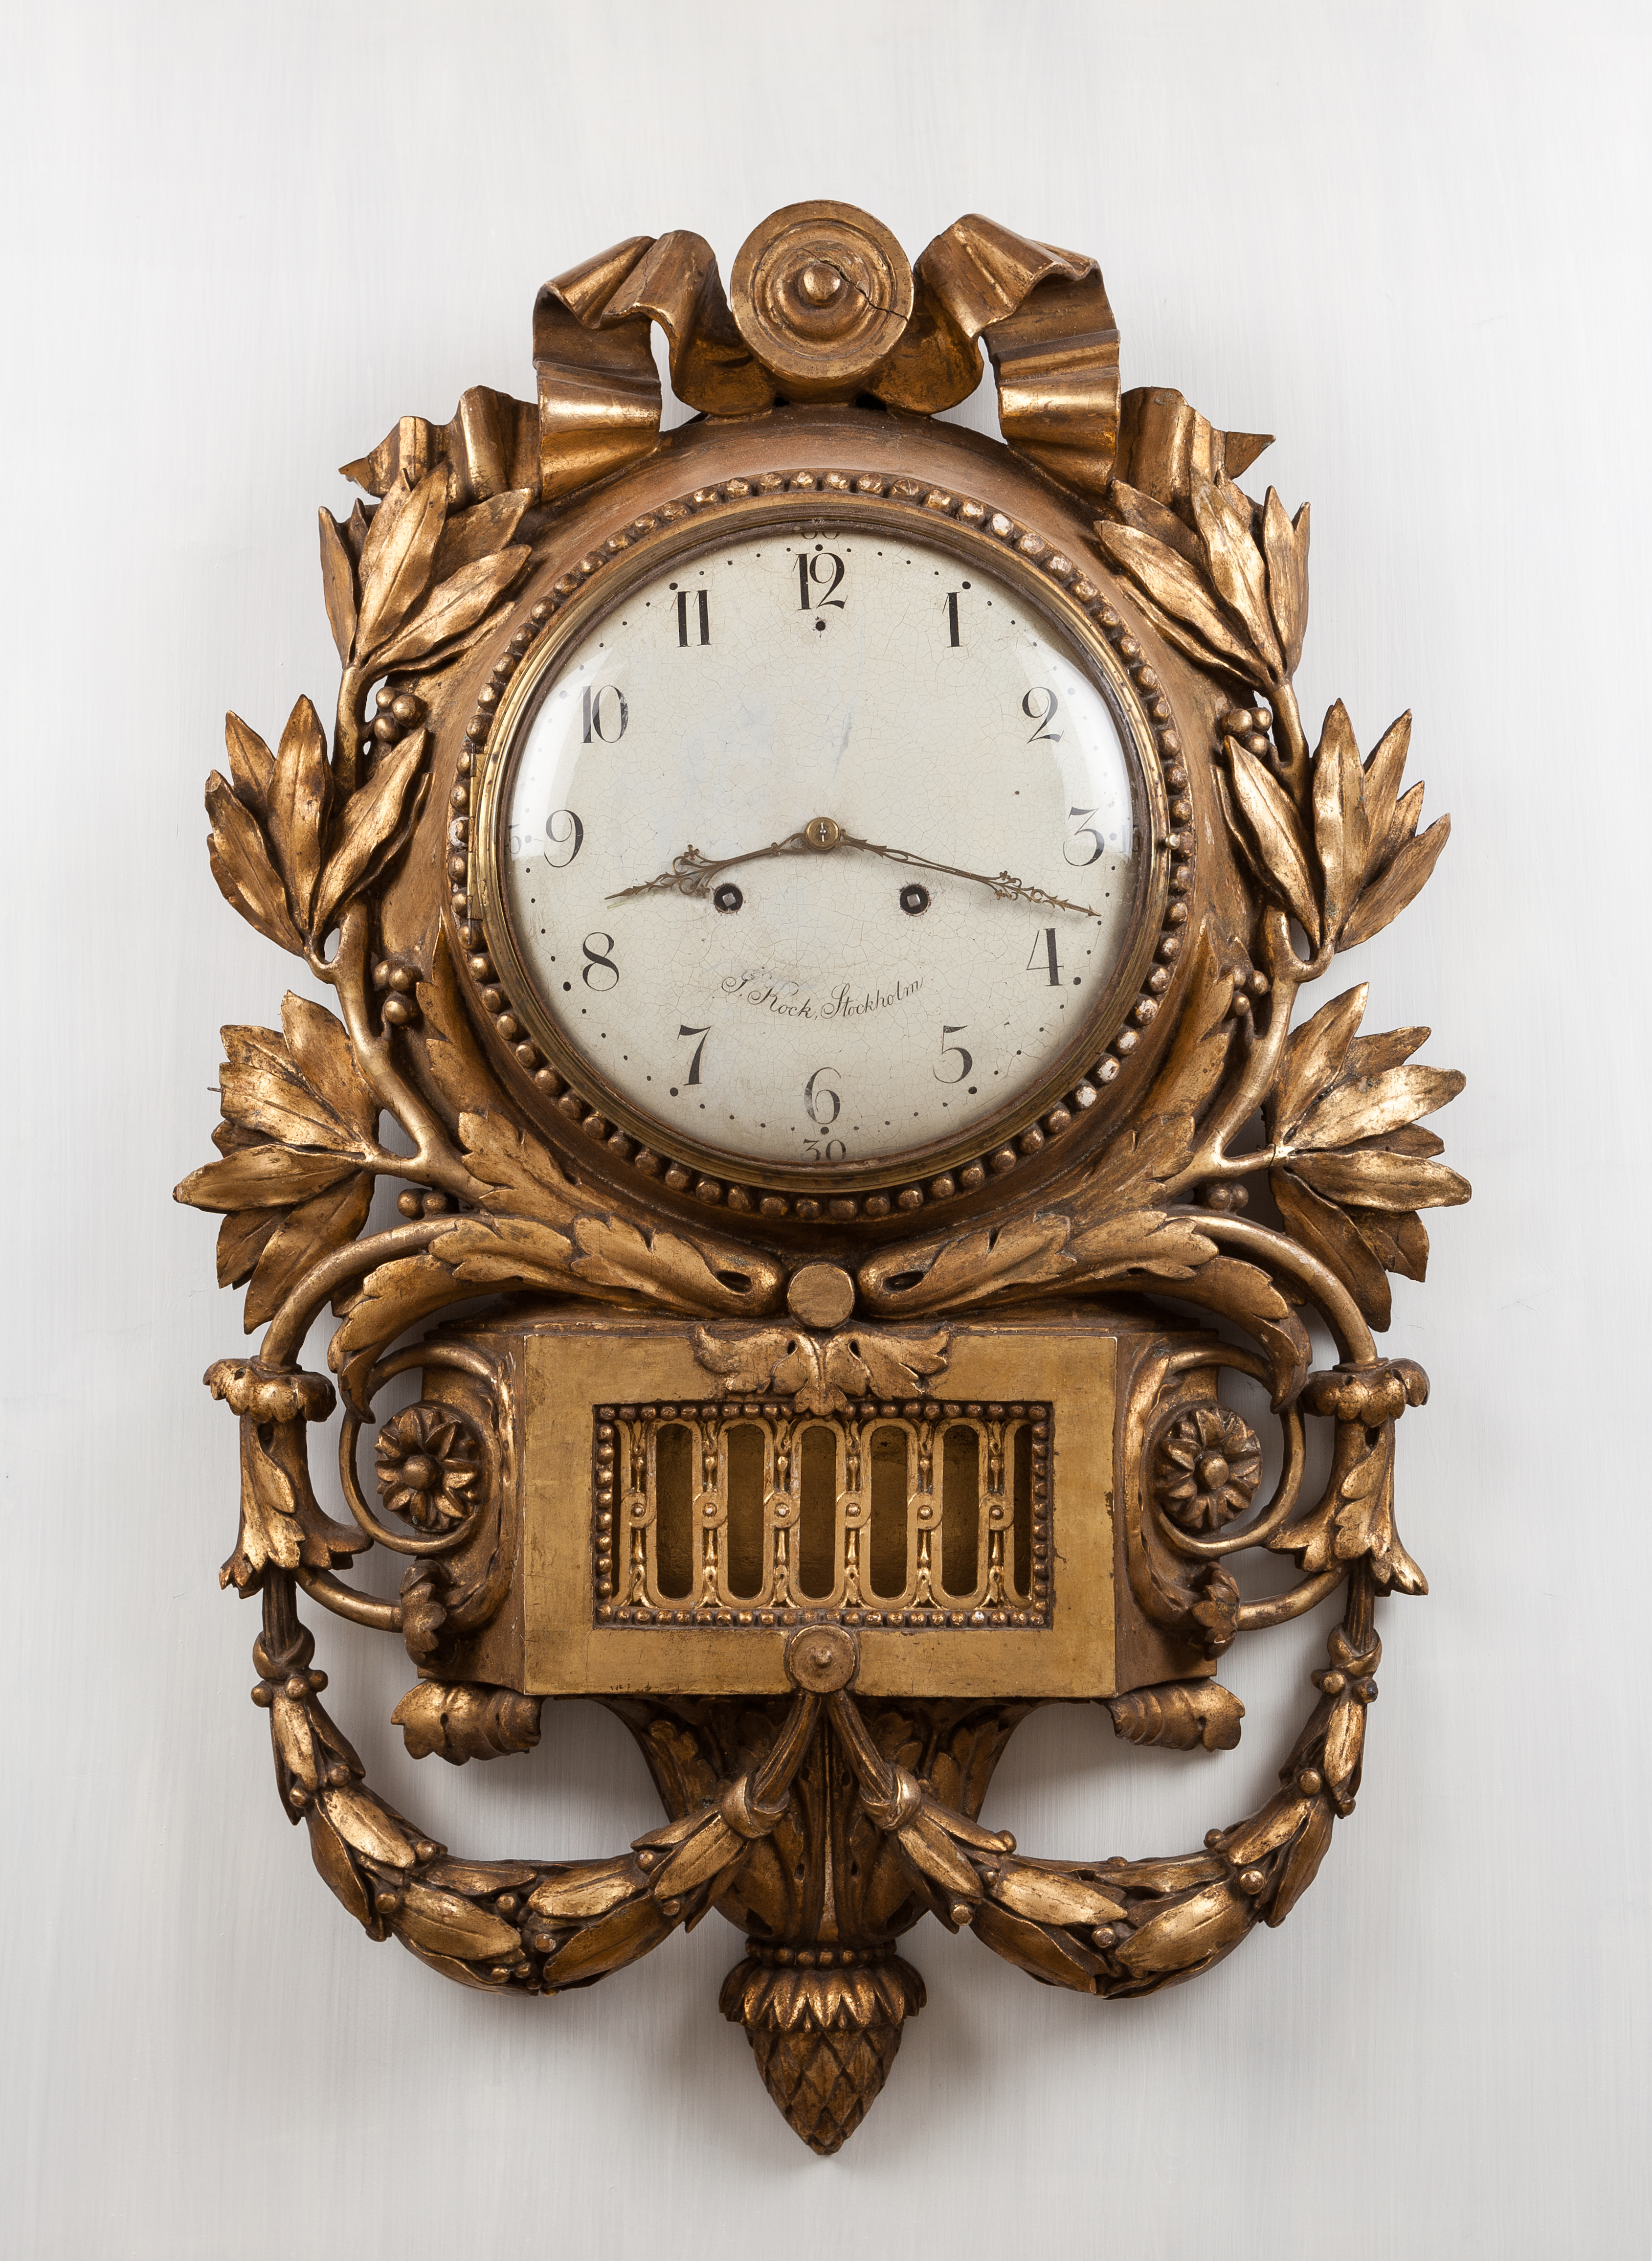 Clock with a later time